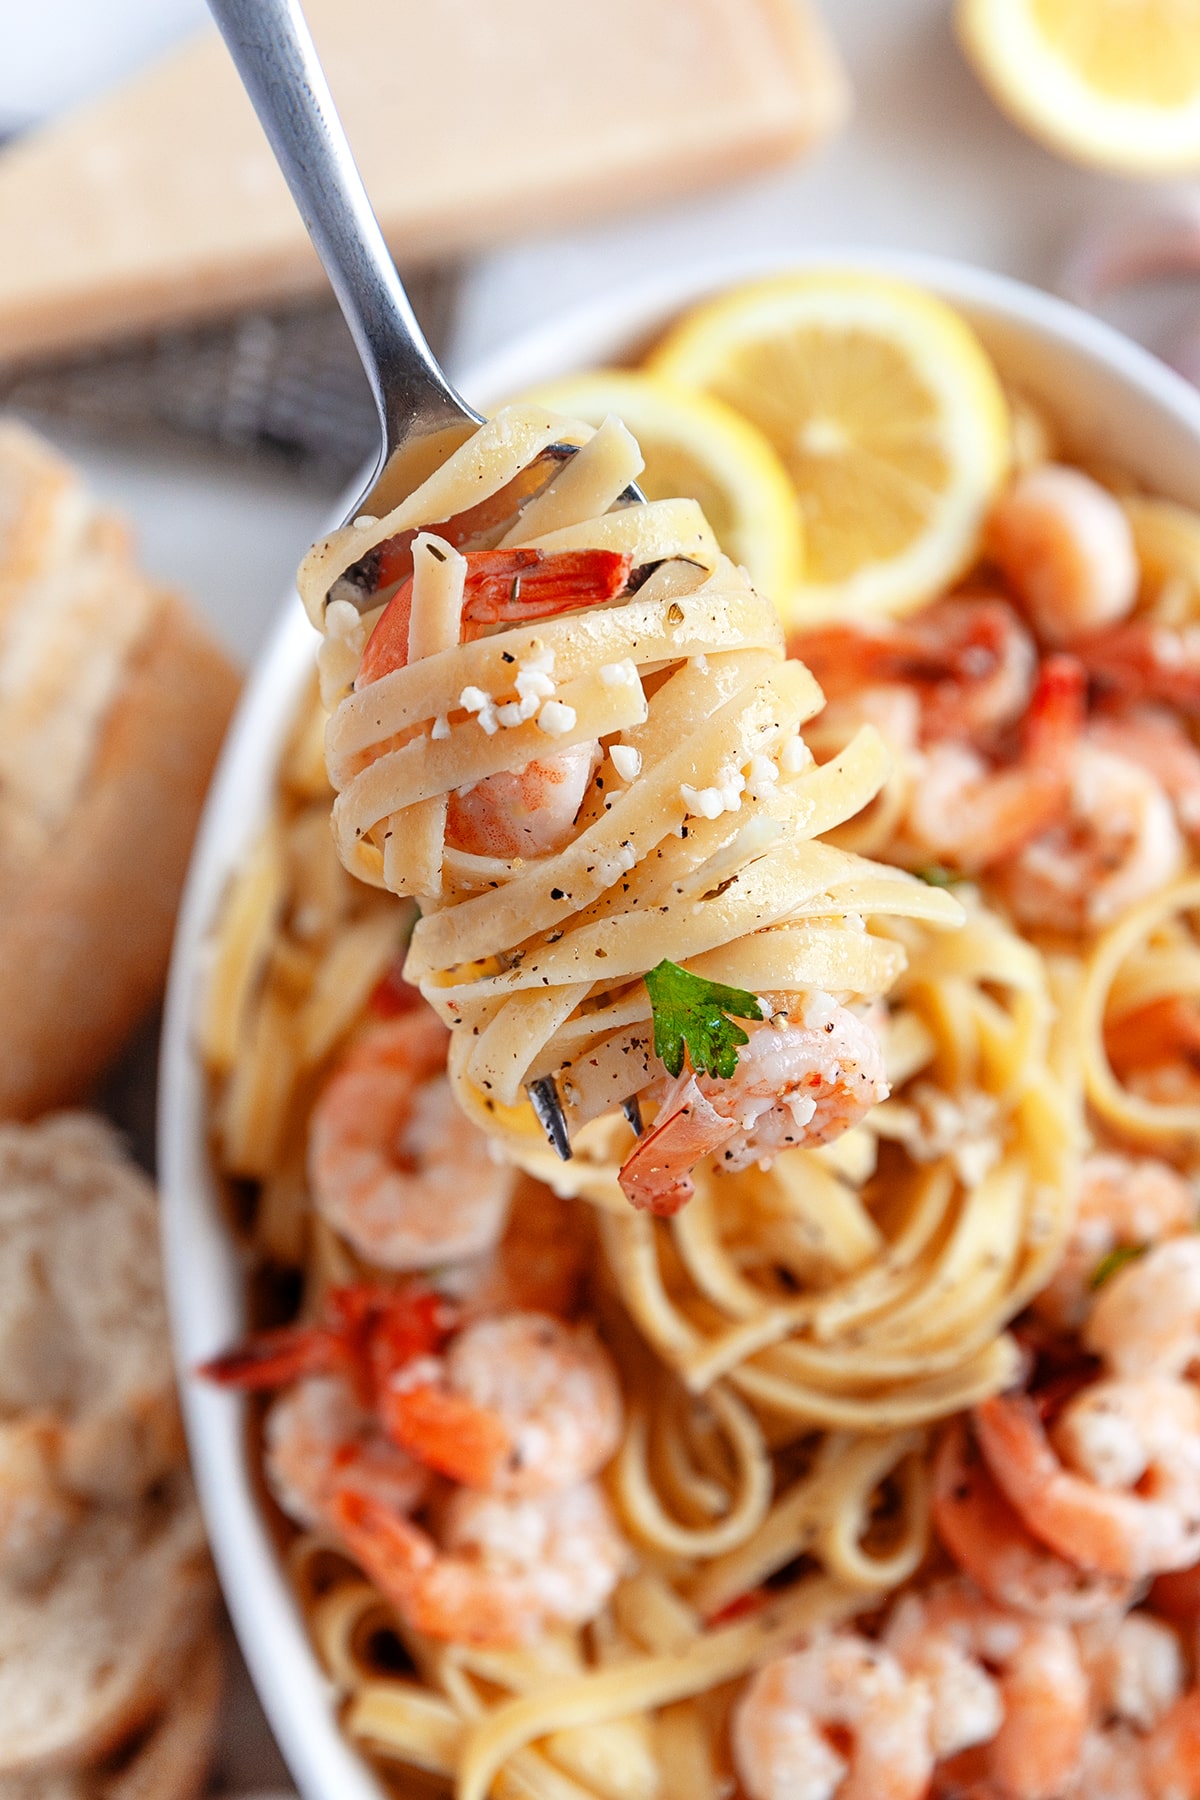 Forkful of pasta and shrimp. 